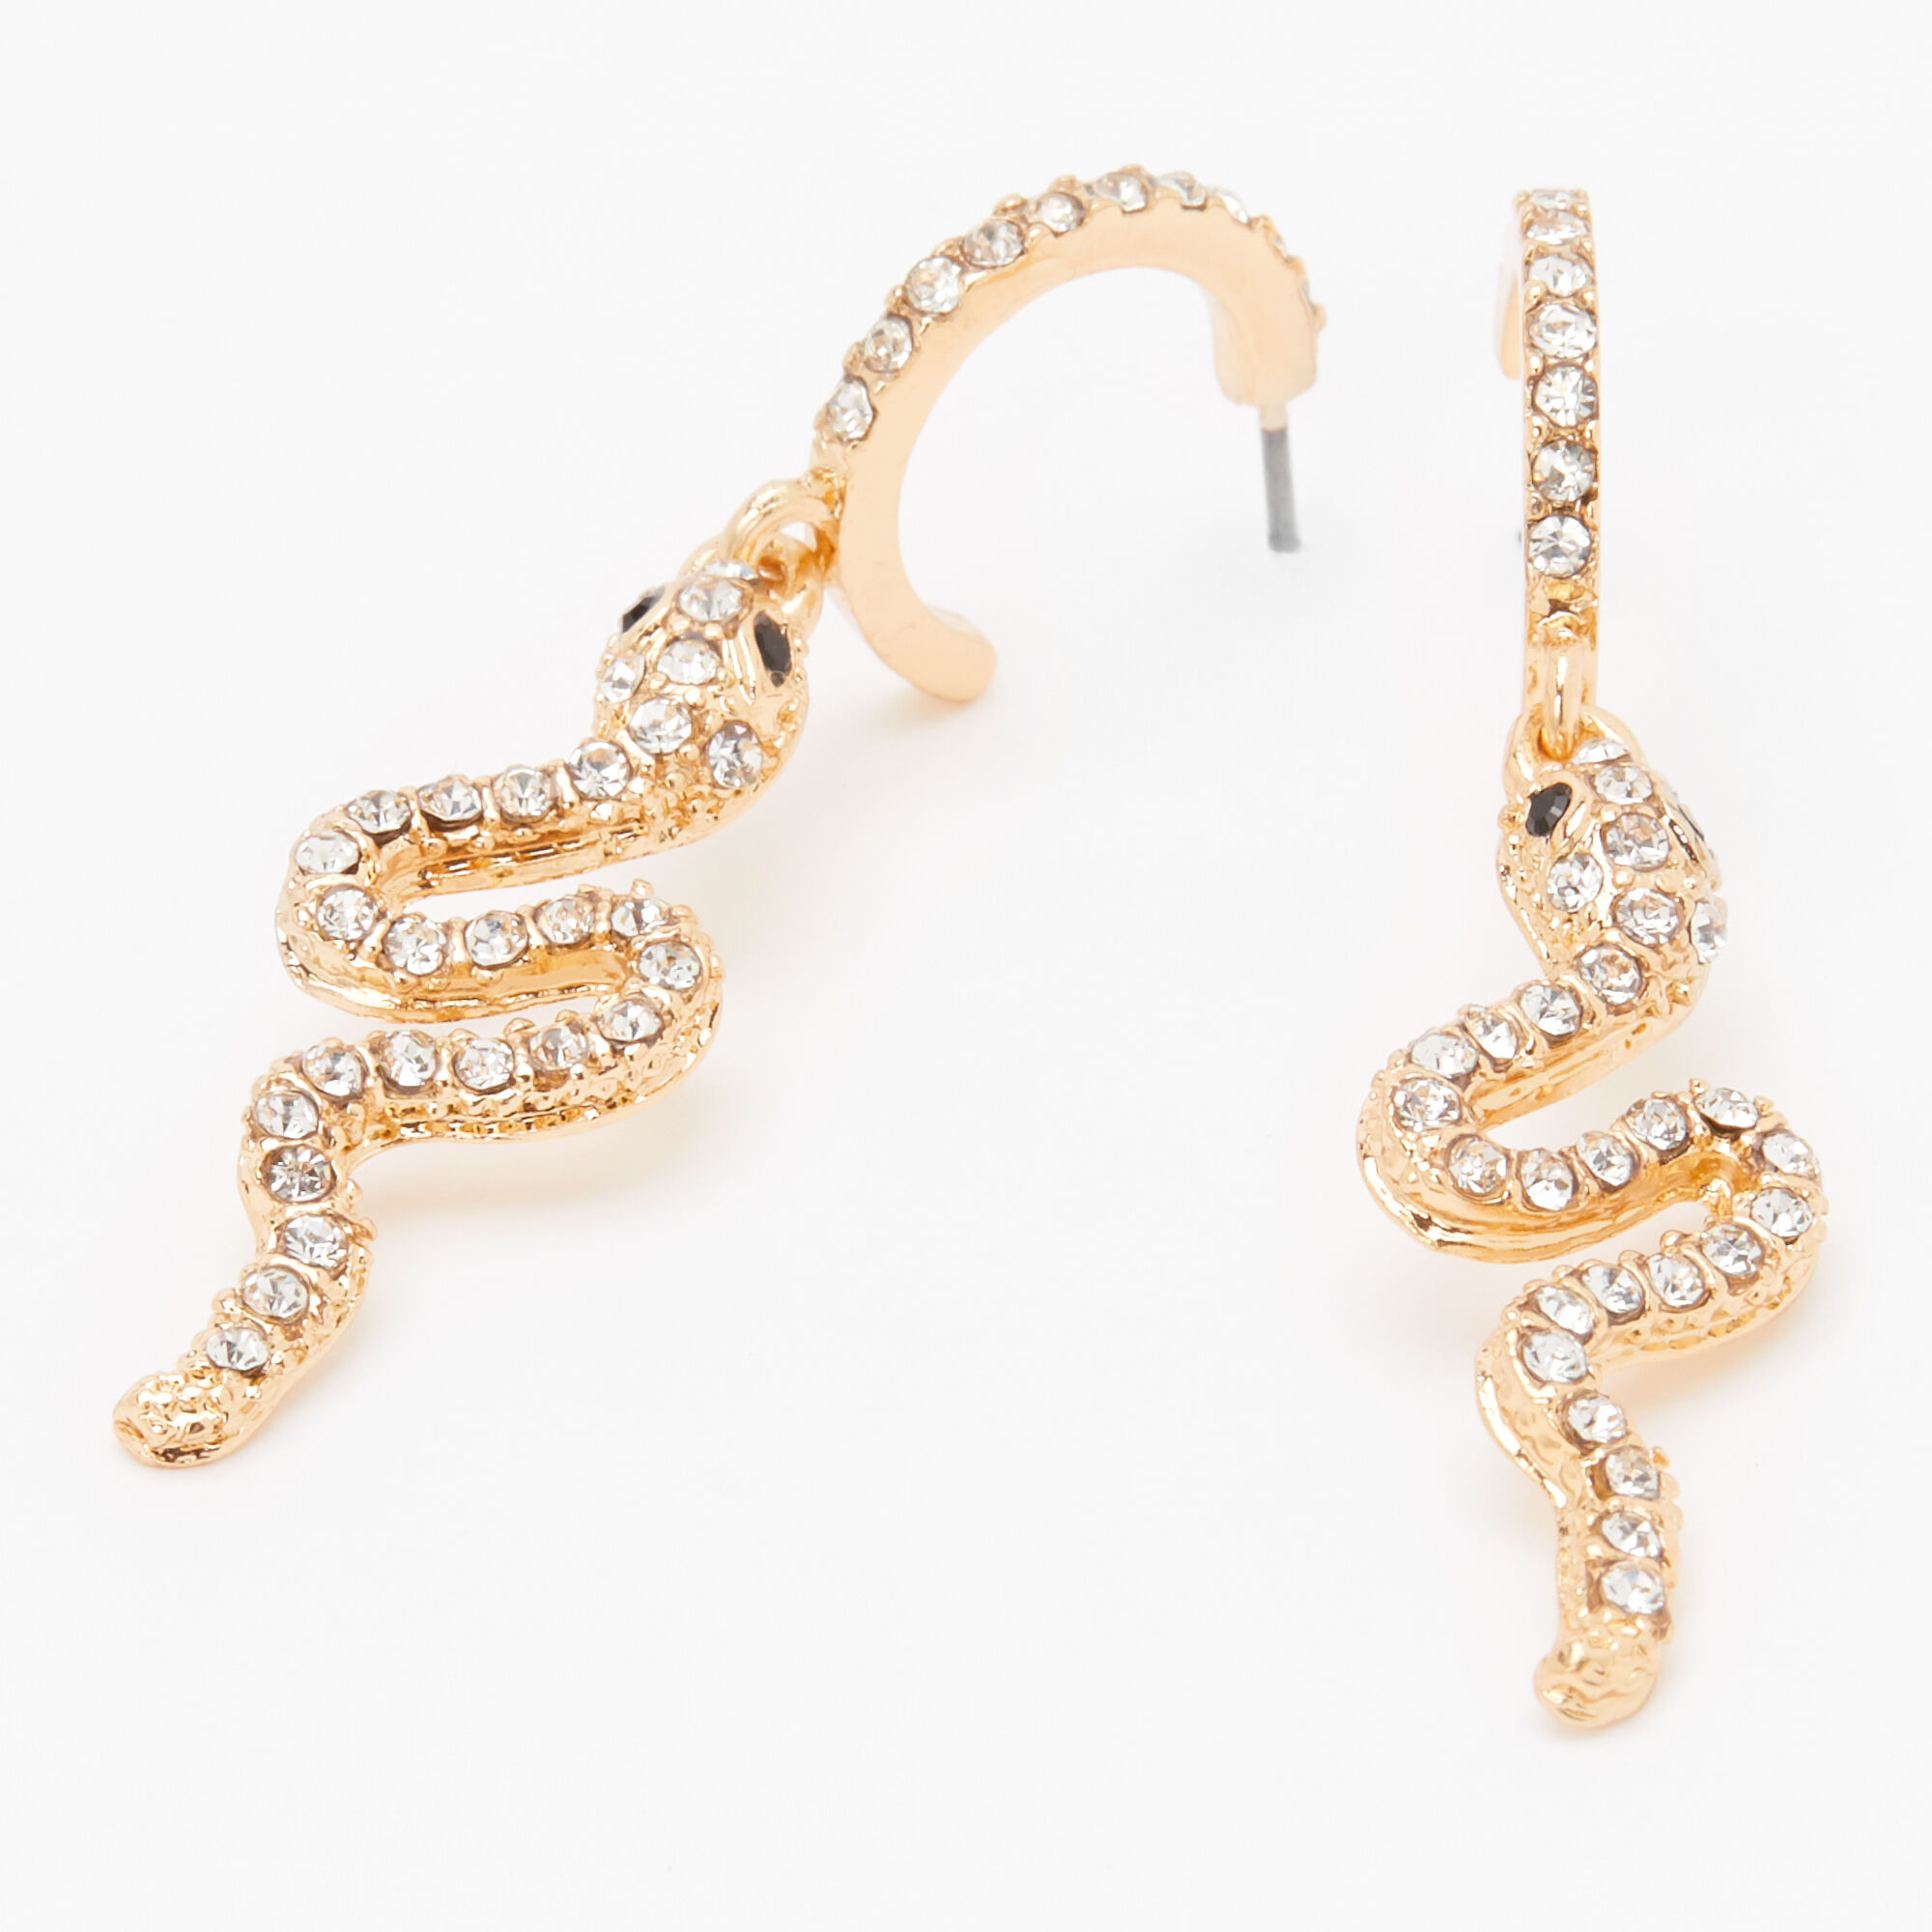 View Claires 15MM Embellished Snake Hoop Earrings Gold information